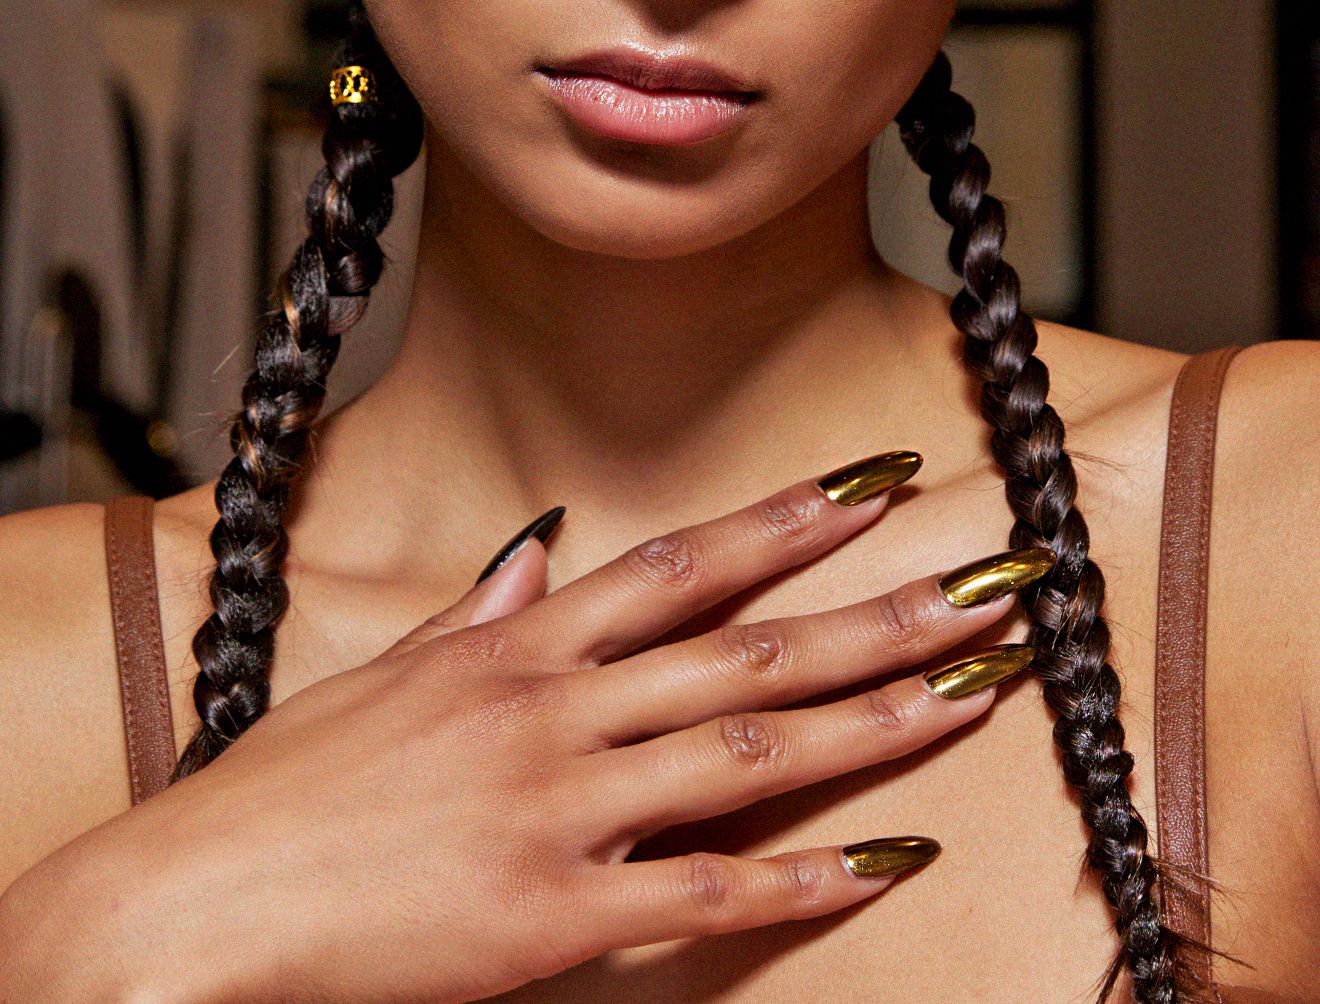 Star French Manicures Are Bringing the '90s Biker Aesthetic to Your Nails